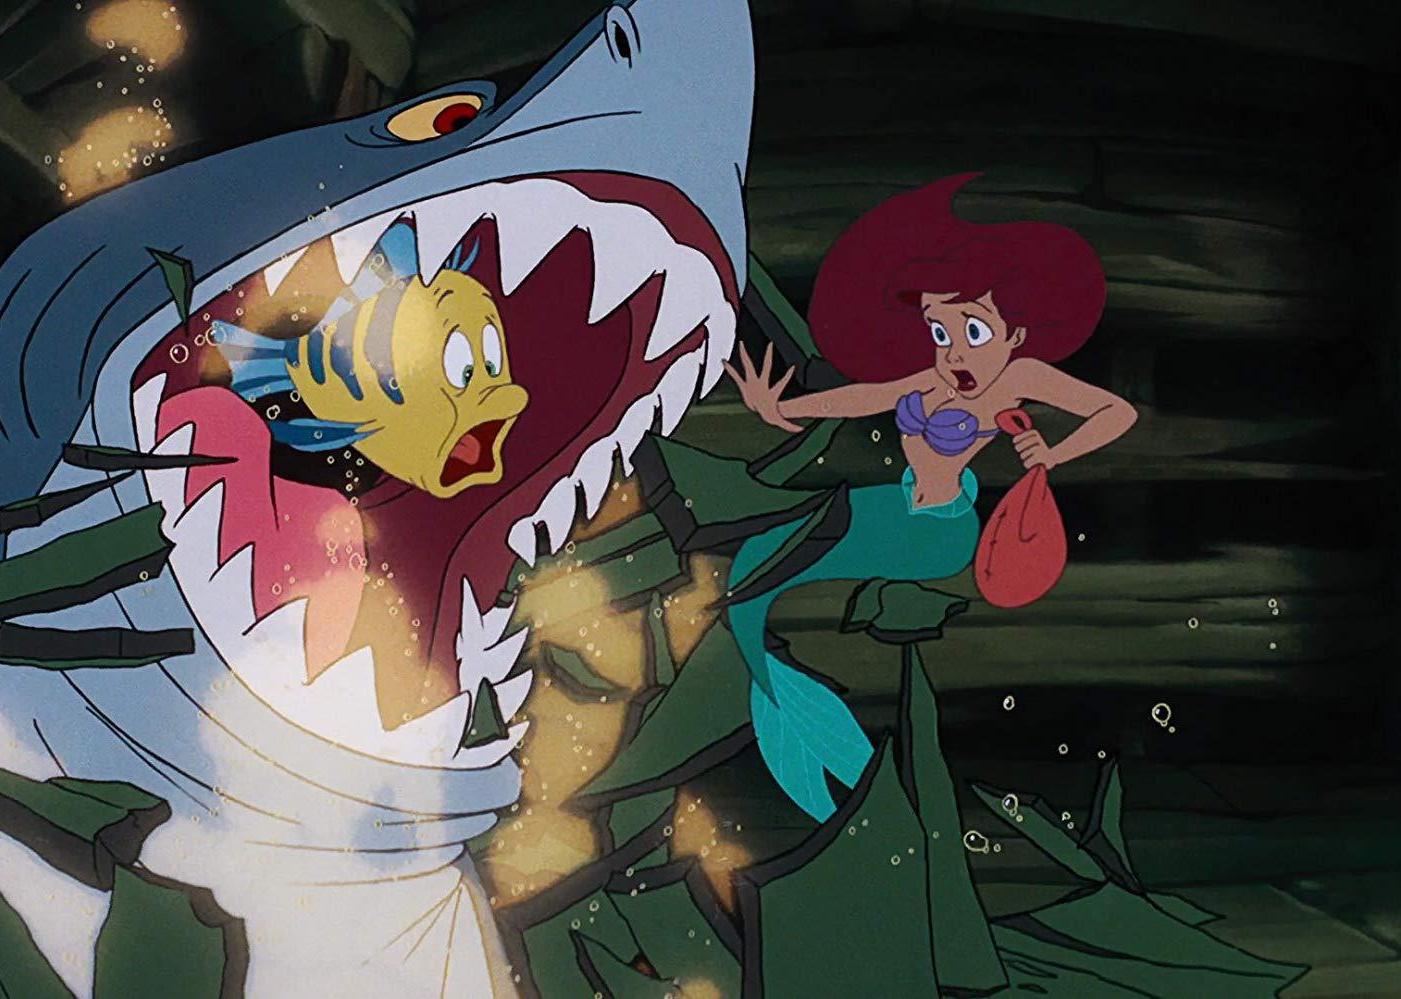 The Little Mermaid in shock looking at an open shark